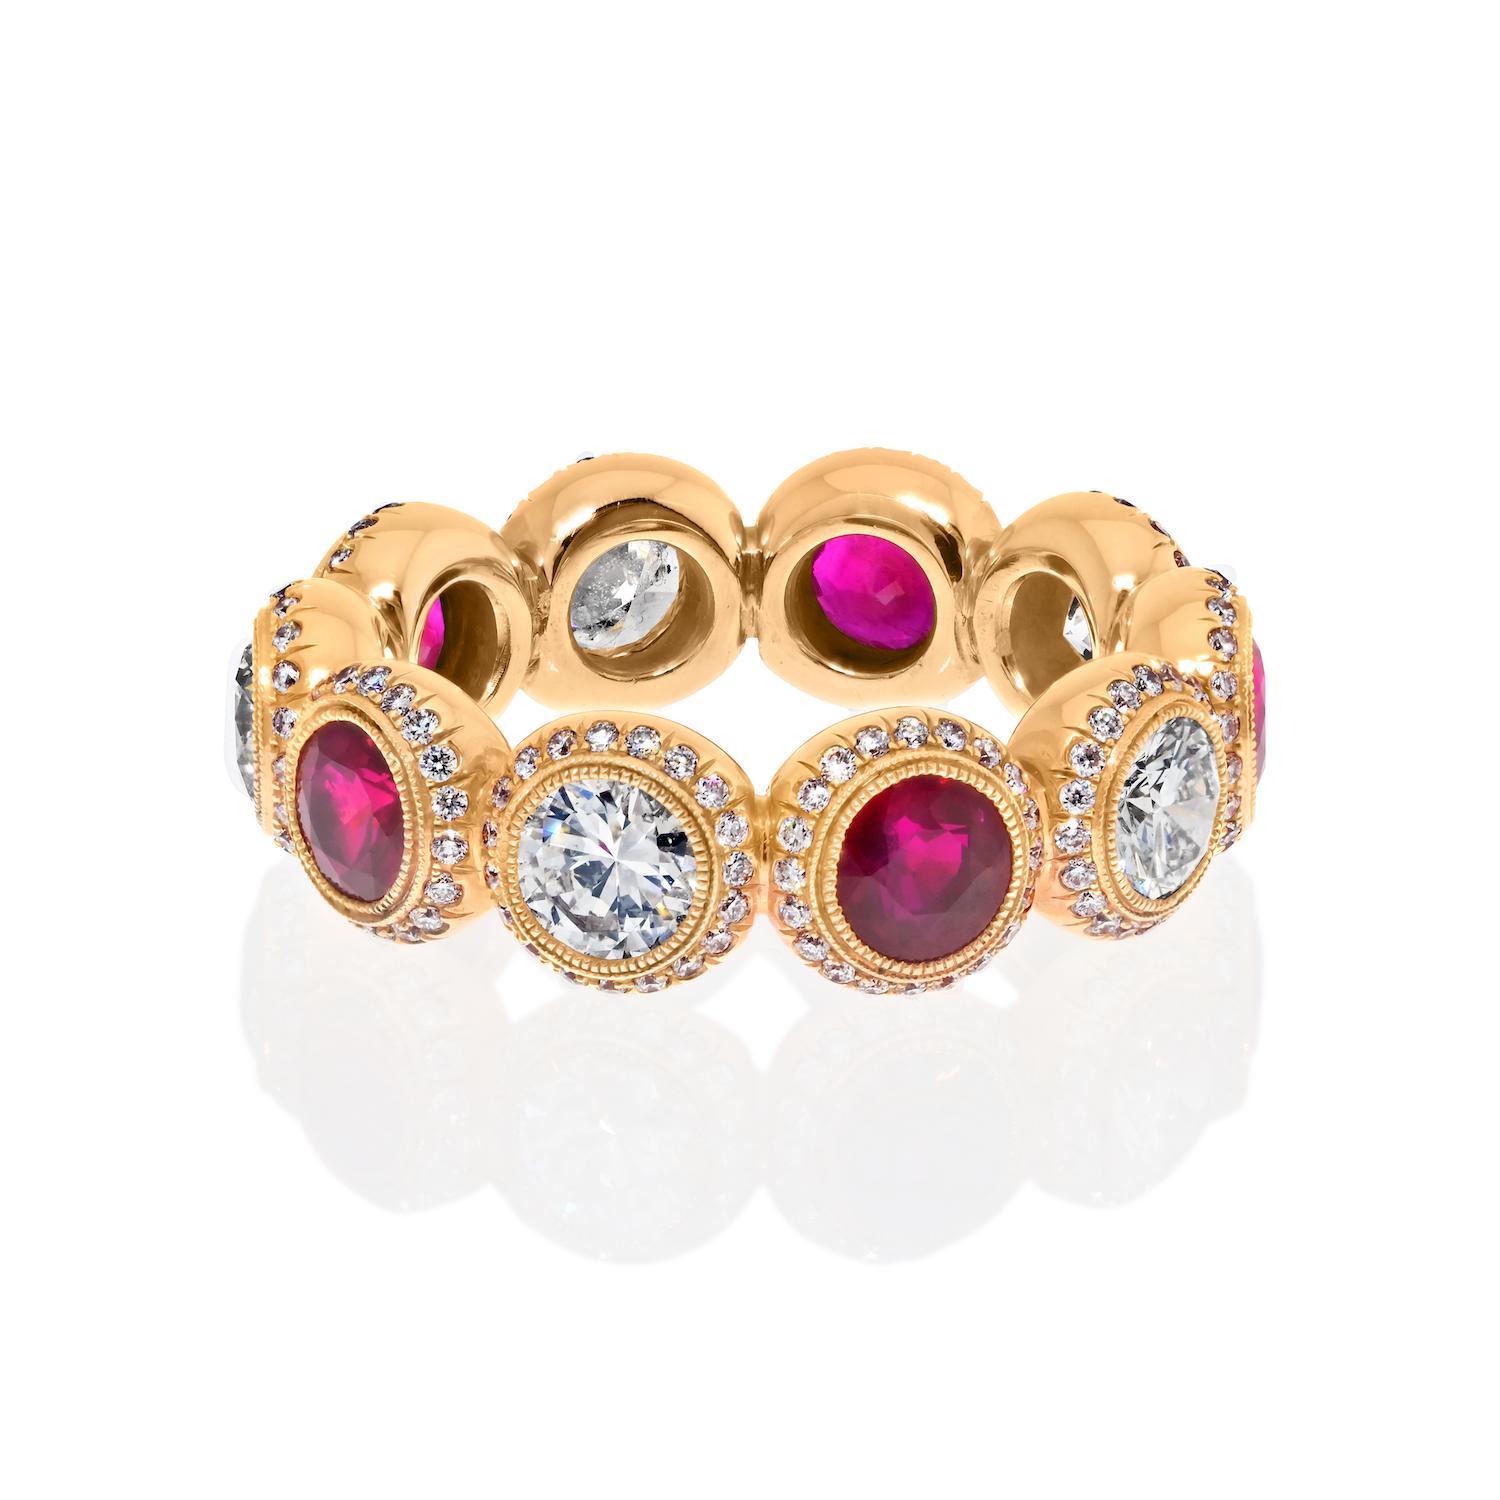 Introducing our stunning handmade ruby and diamond eternity band, crafted in 18K Gold with unparalleled attention to detail. This breathtaking ring is made from 18k yellow gold and features a mesmerizing combination of rubies and diamonds that